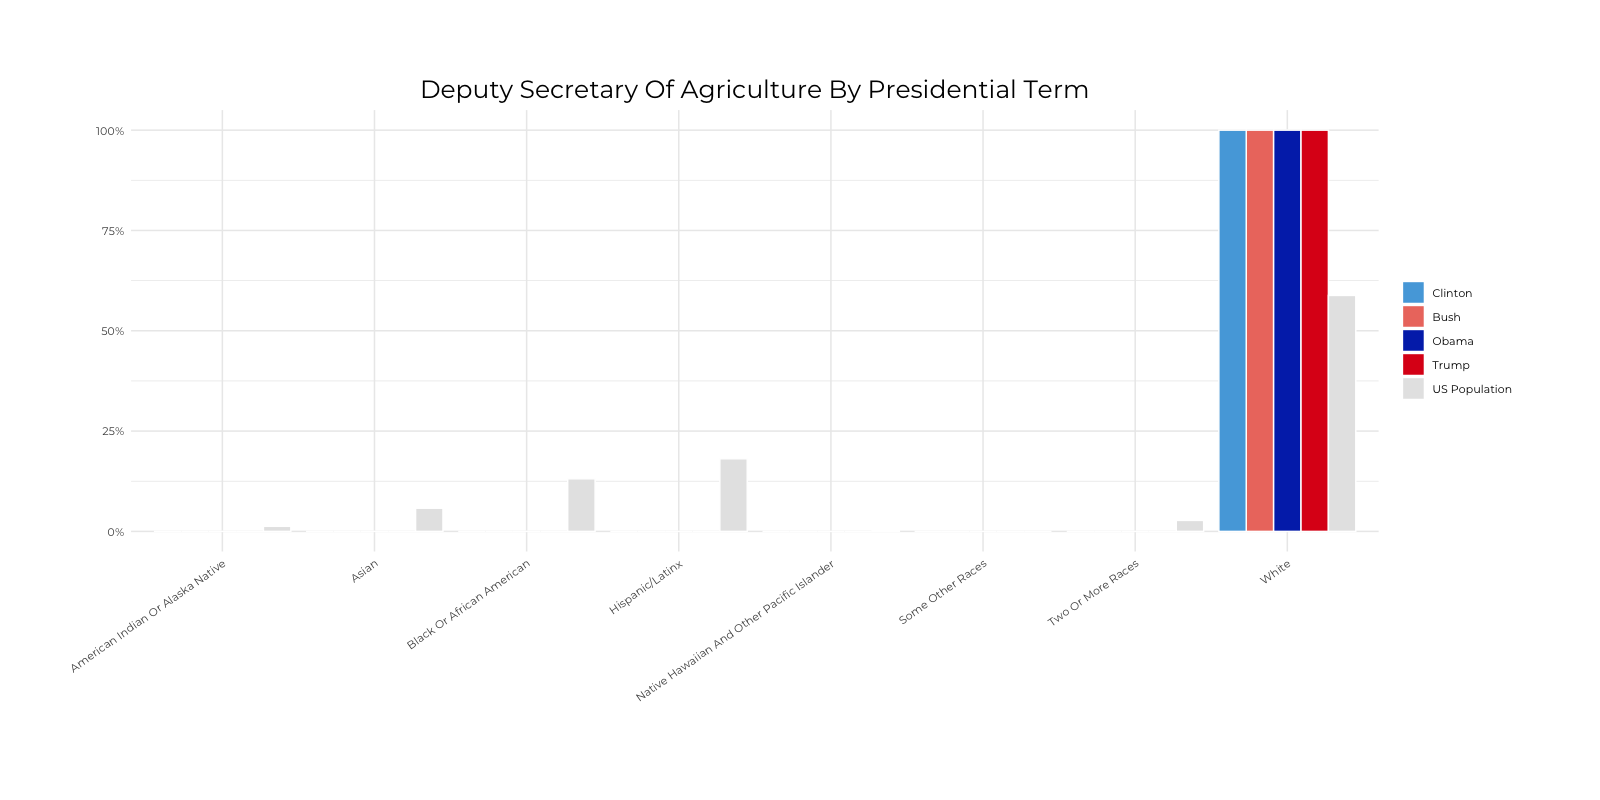 Graph about Racial Composition Comparison of Deputy Secretary of Agriculture by Presidential Terms. More detailed text description below.